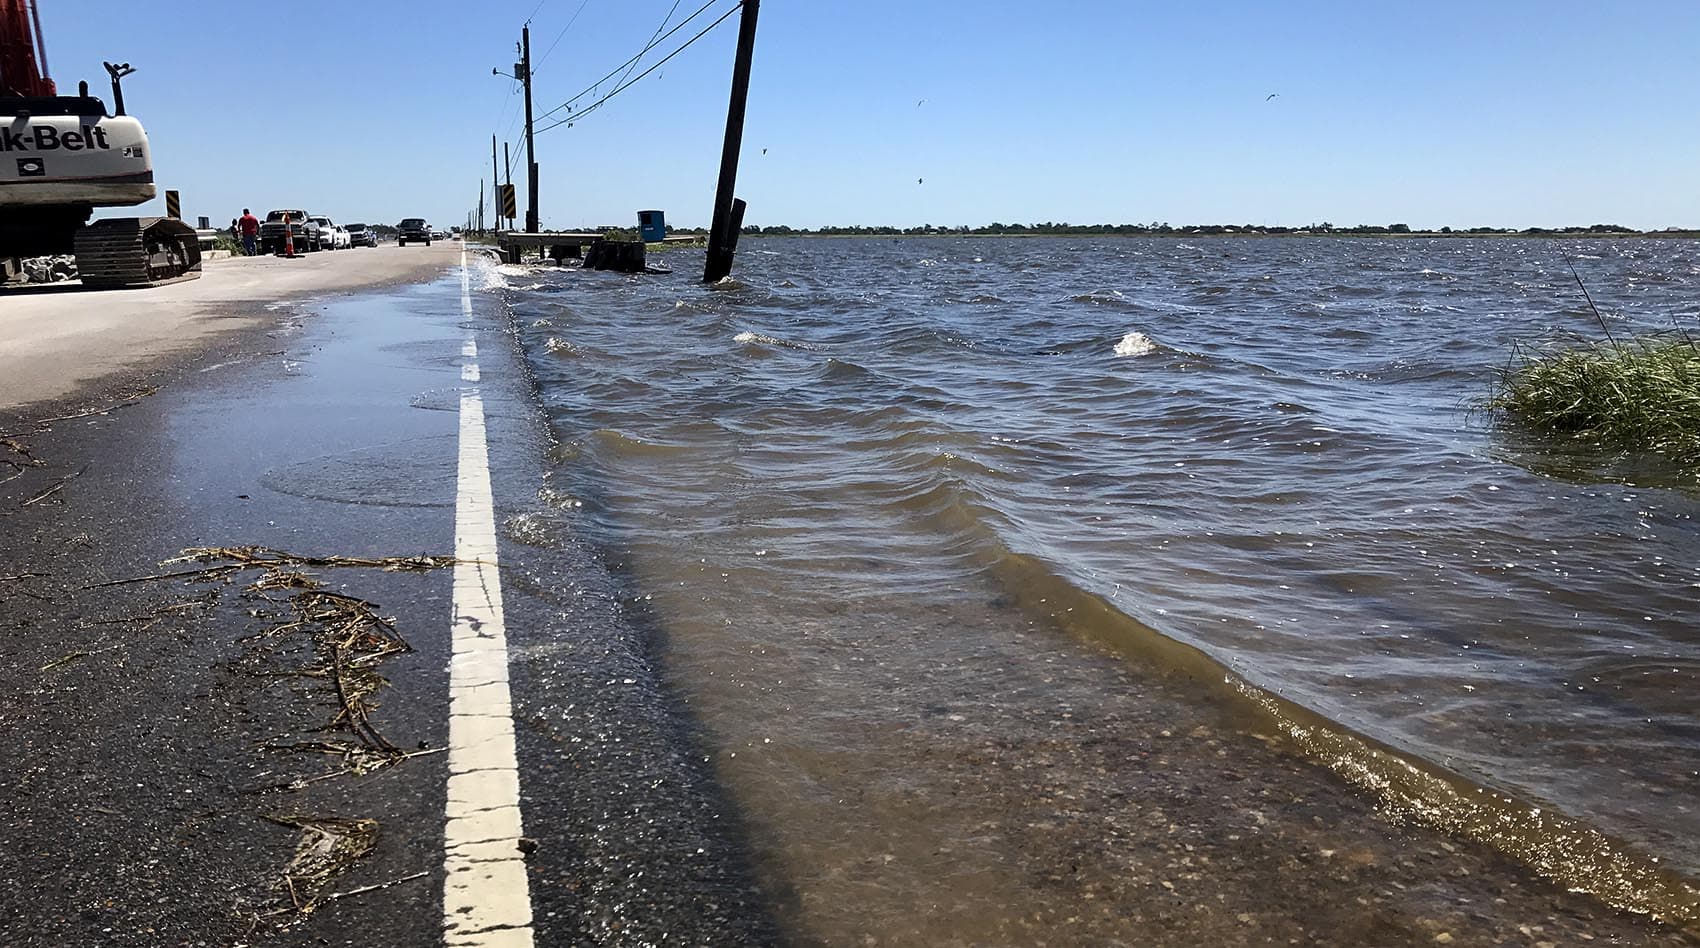 The road leading to Isle de Jean Charles, La., is known to flood in perfect weather. (Peter O'Dowd/Here & Now)